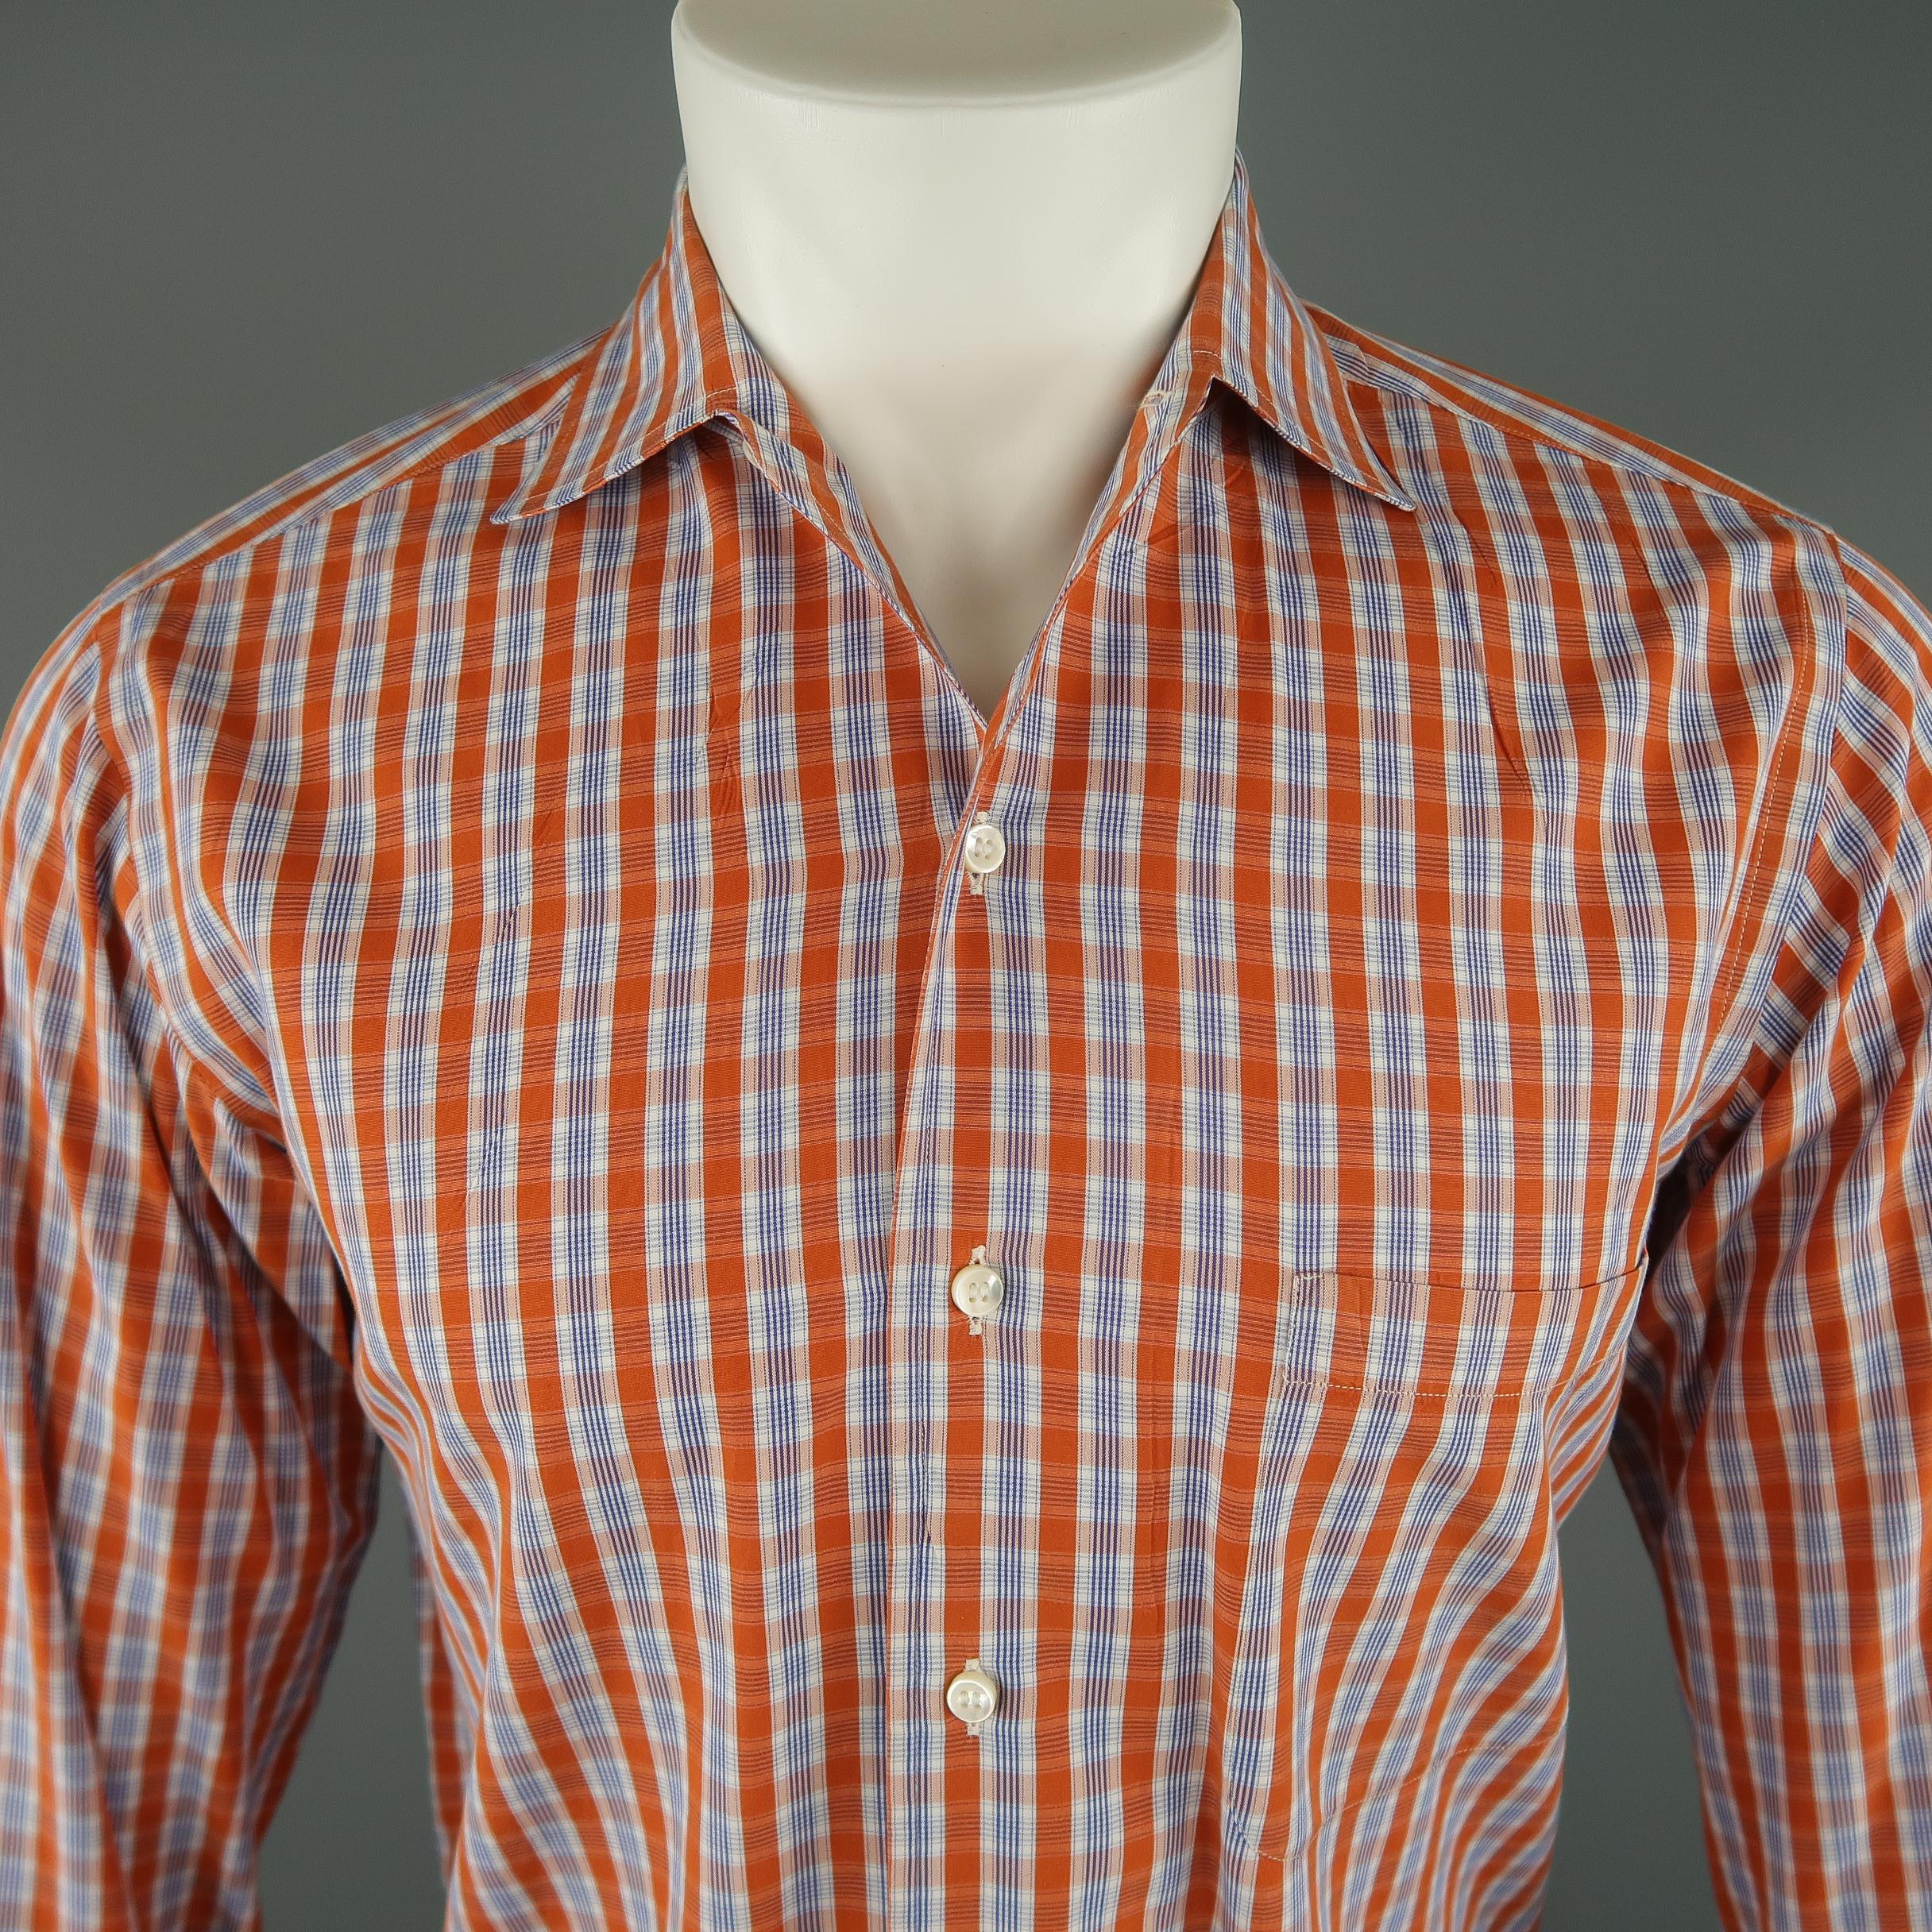 LORO PIANA long sleeve shirt comes in orange and white tones in plaid cotton material, with a spread collar, front pocket and button up.
 
Excellent Pre-Owned Condition.
Marked: S
 
Measurements:
 
Shoulder: 15.5 in.
Chest: 42 in.
Sleeve: 26